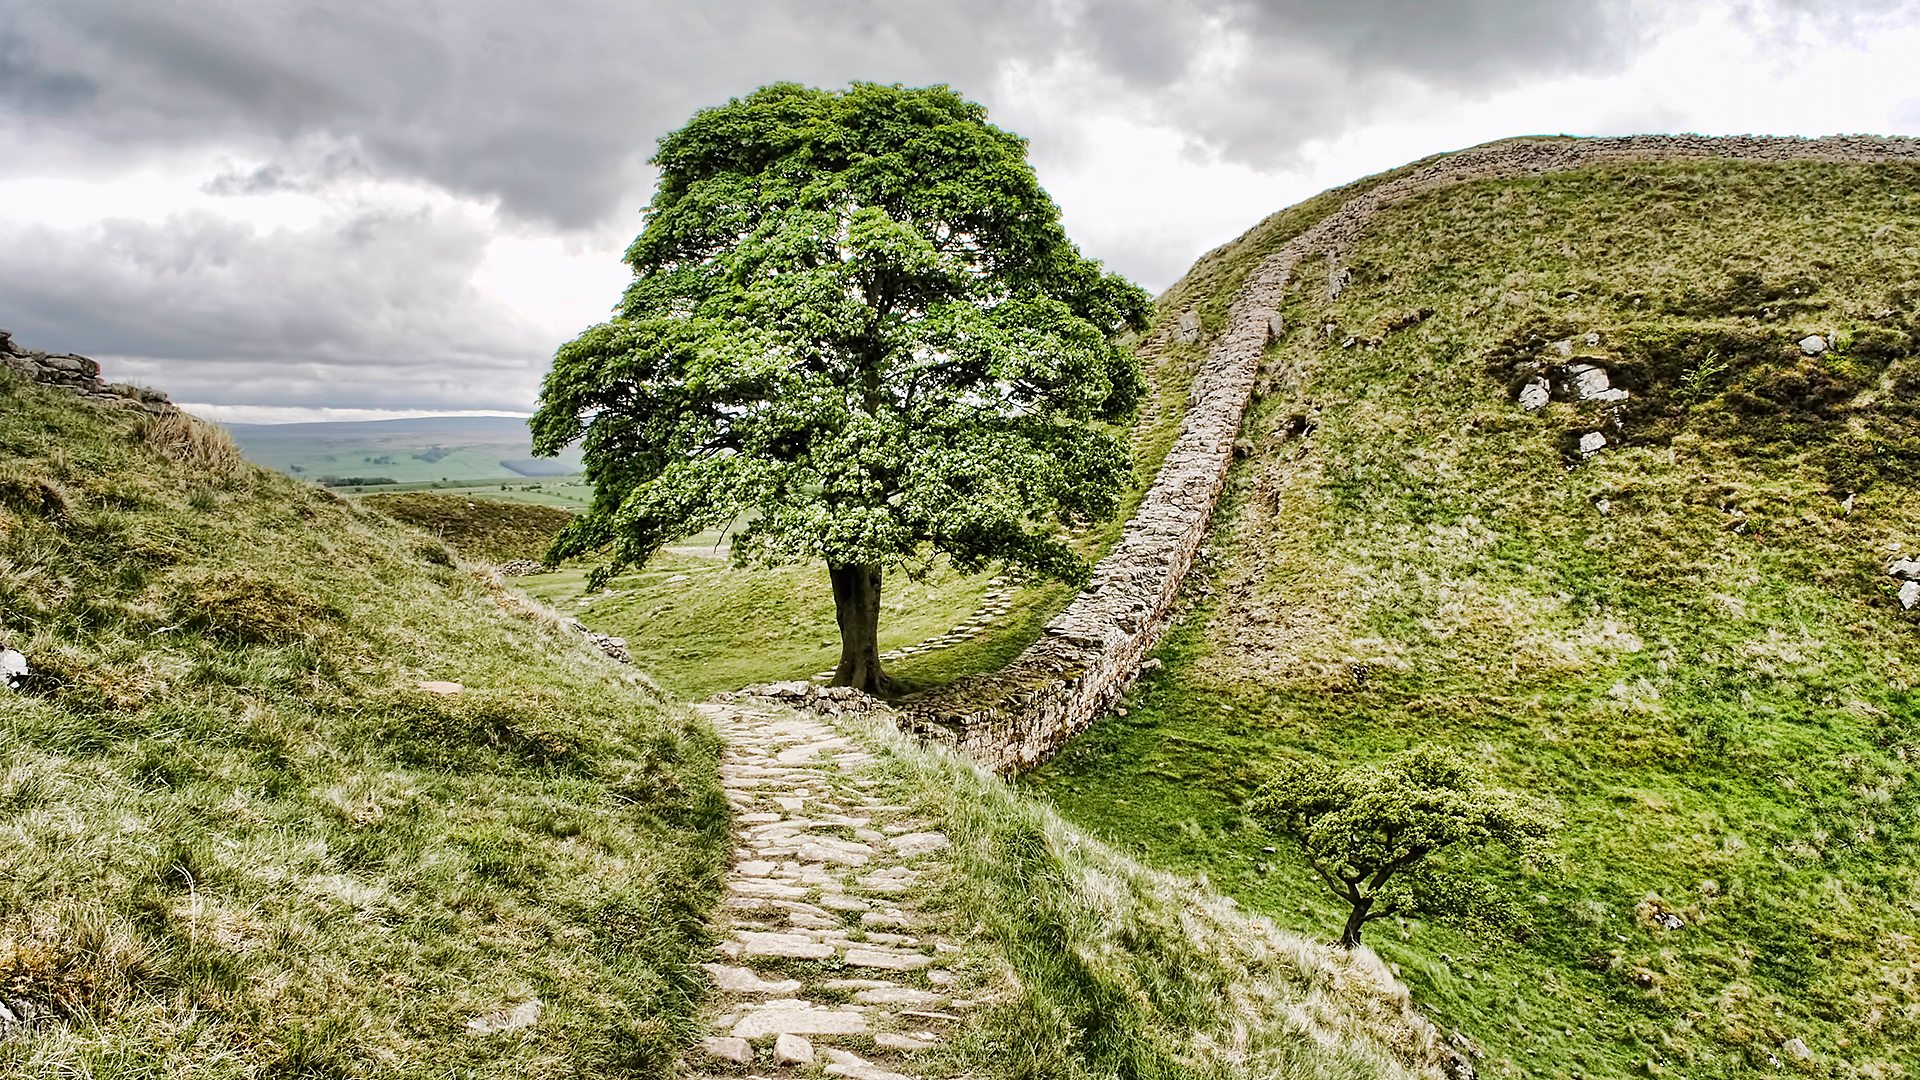 The tree at sycamore gap in Northumberland before it was felled (Credit: Getty Images)